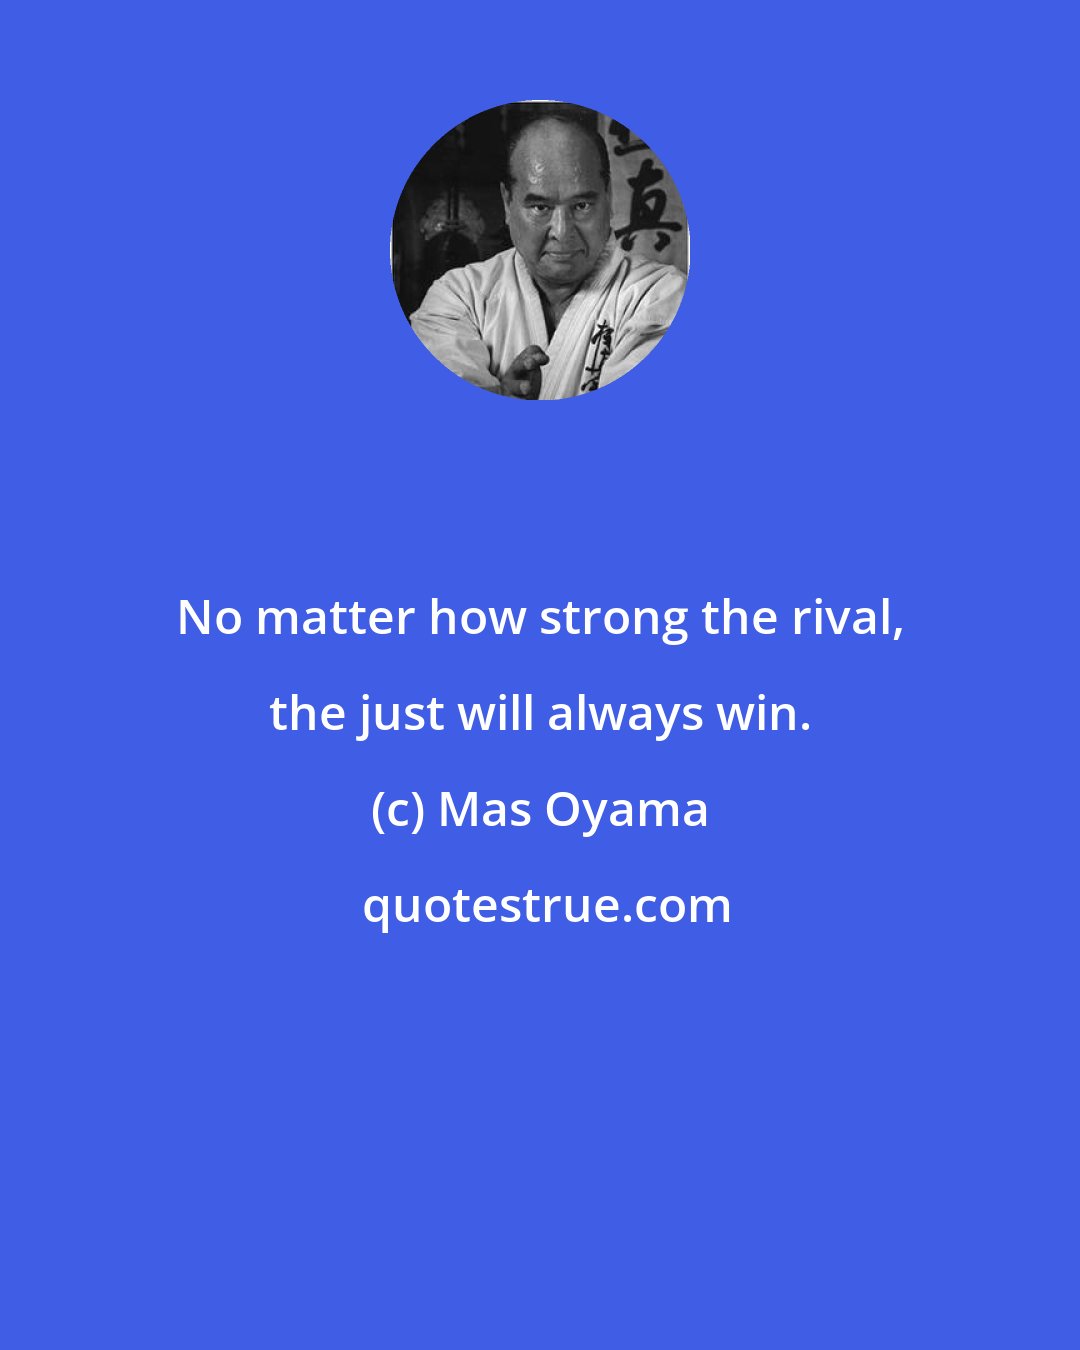 Mas Oyama: No matter how strong the rival, the just will always win.